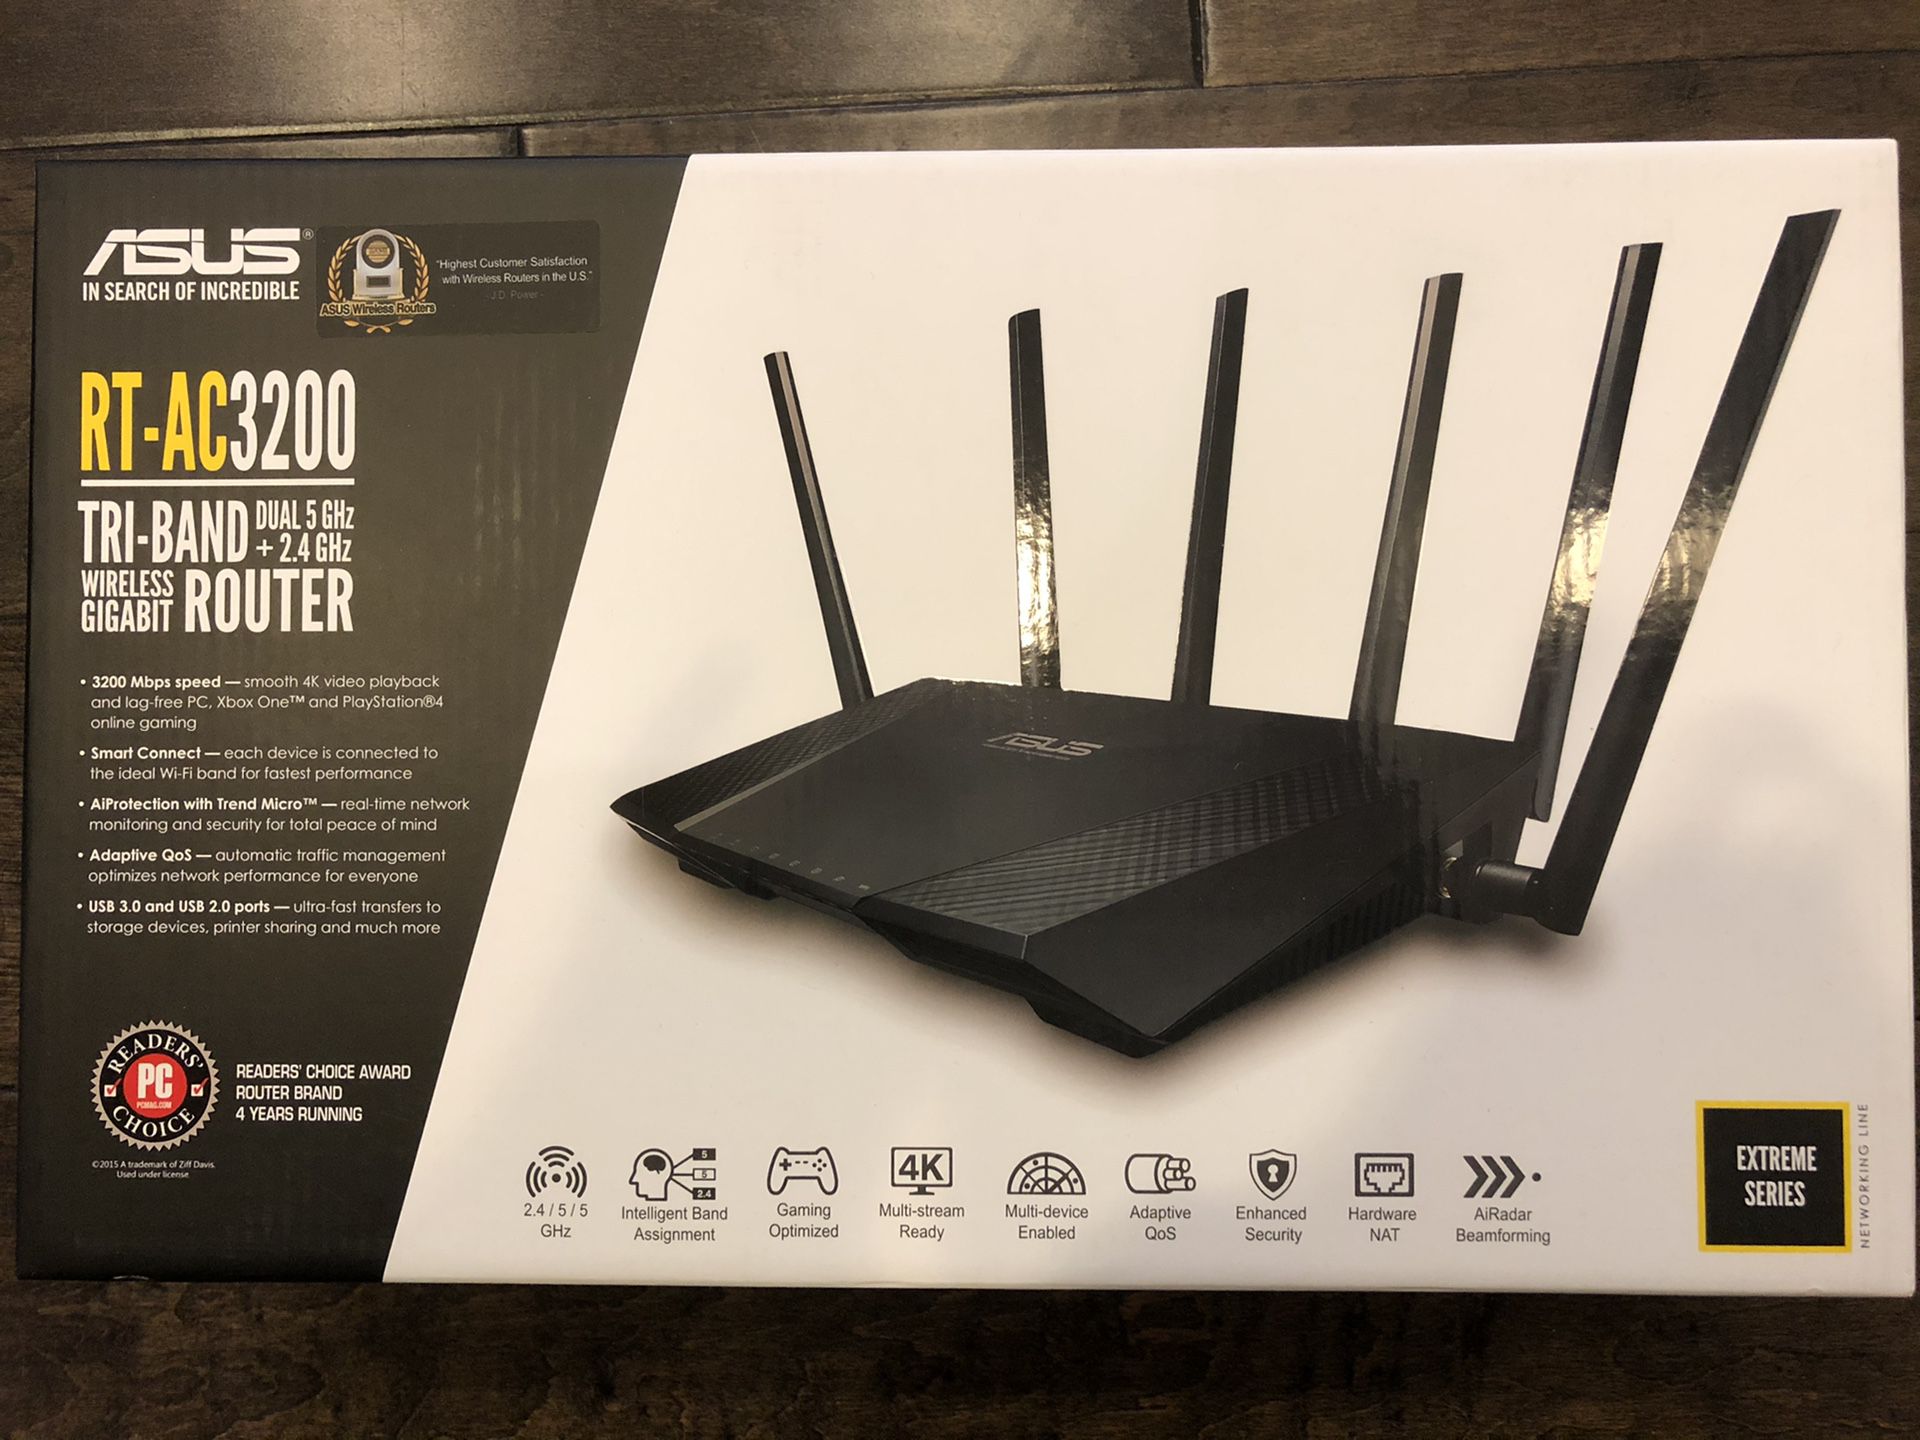 Asus Router RT-AC3200 Tri-band